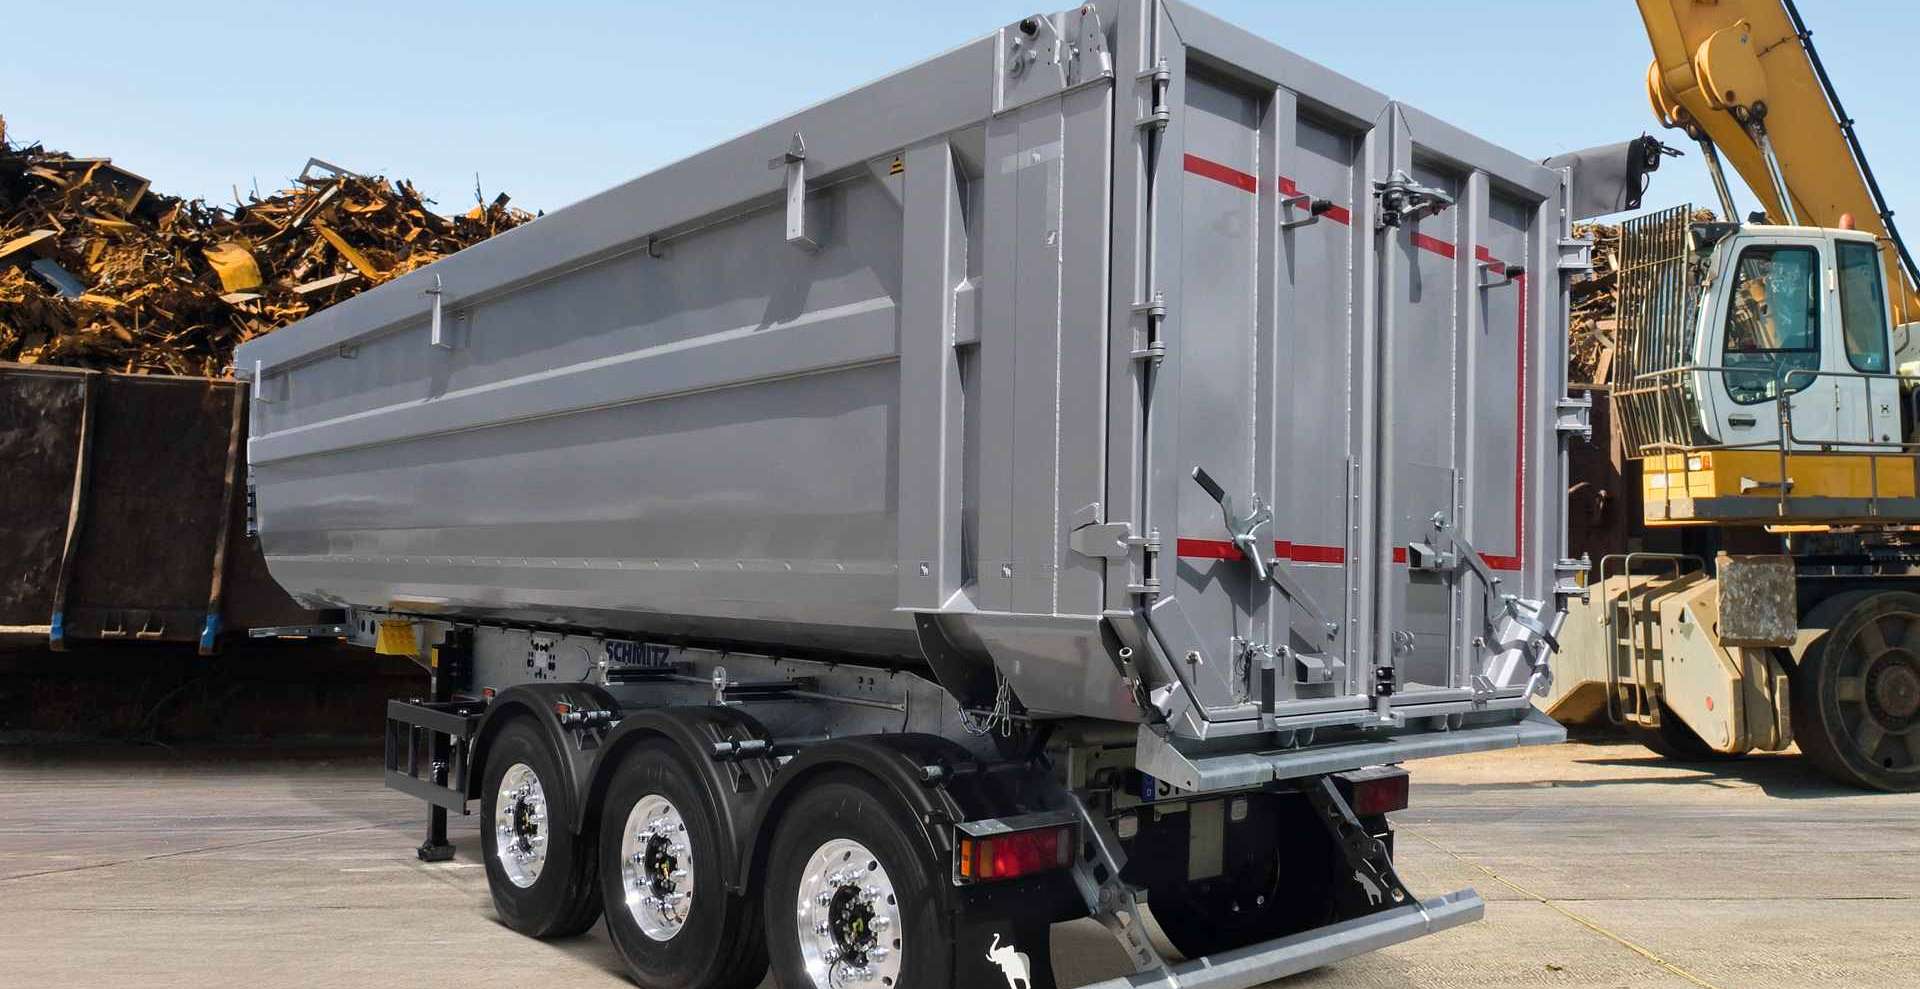 The high-volume S.KI SOLID tipper semi-trailer with rounded steel body for the transport of heavy bulk goods